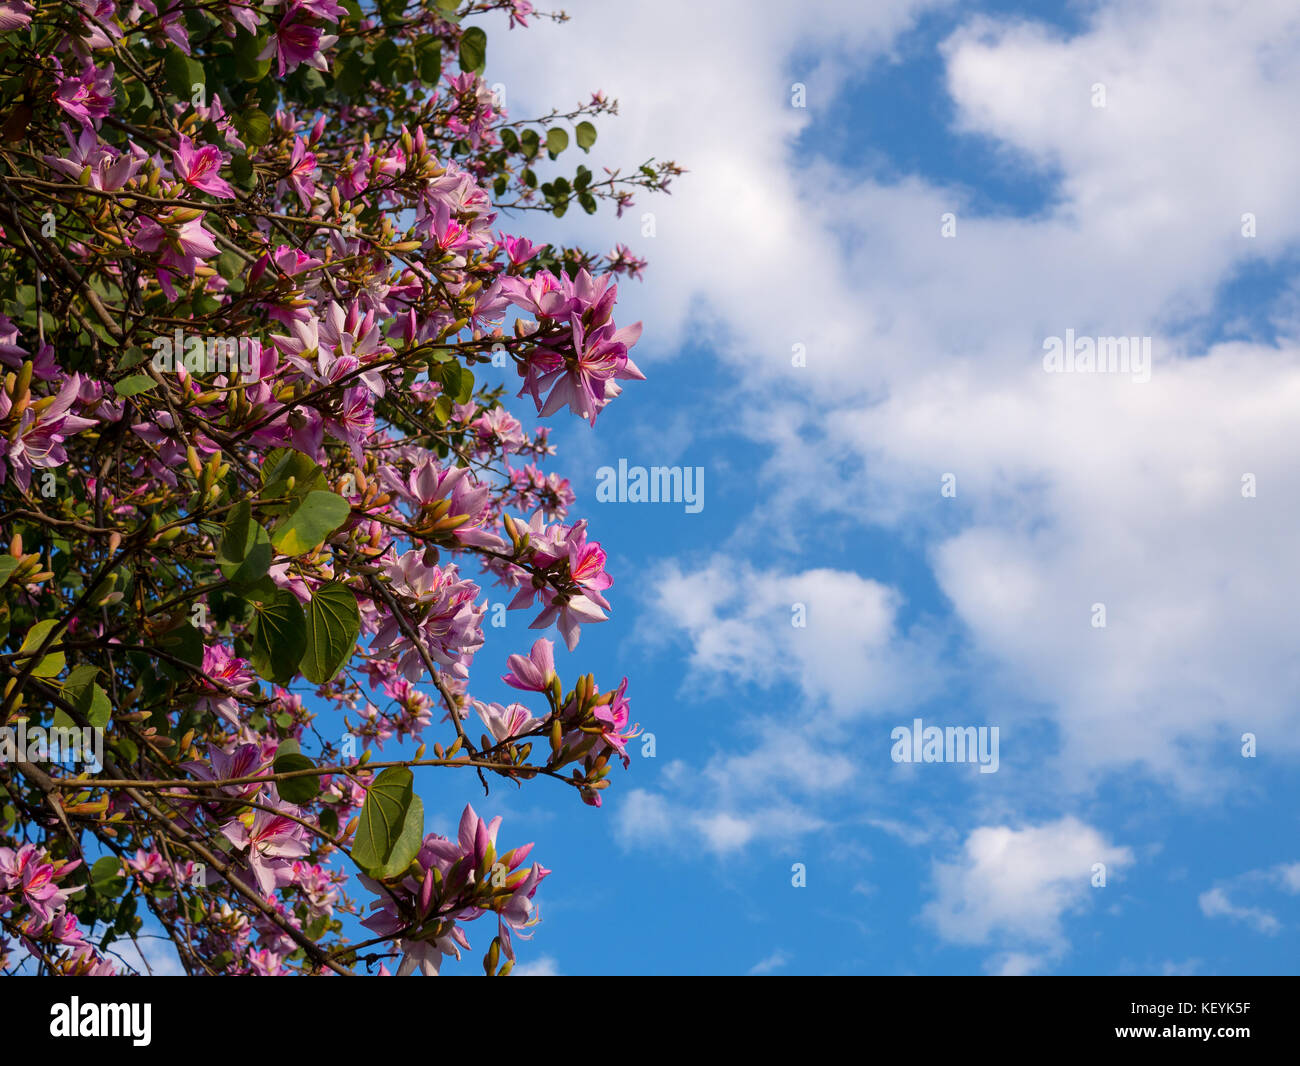 Pink flower on acacia tree with blue sky Stock Photo